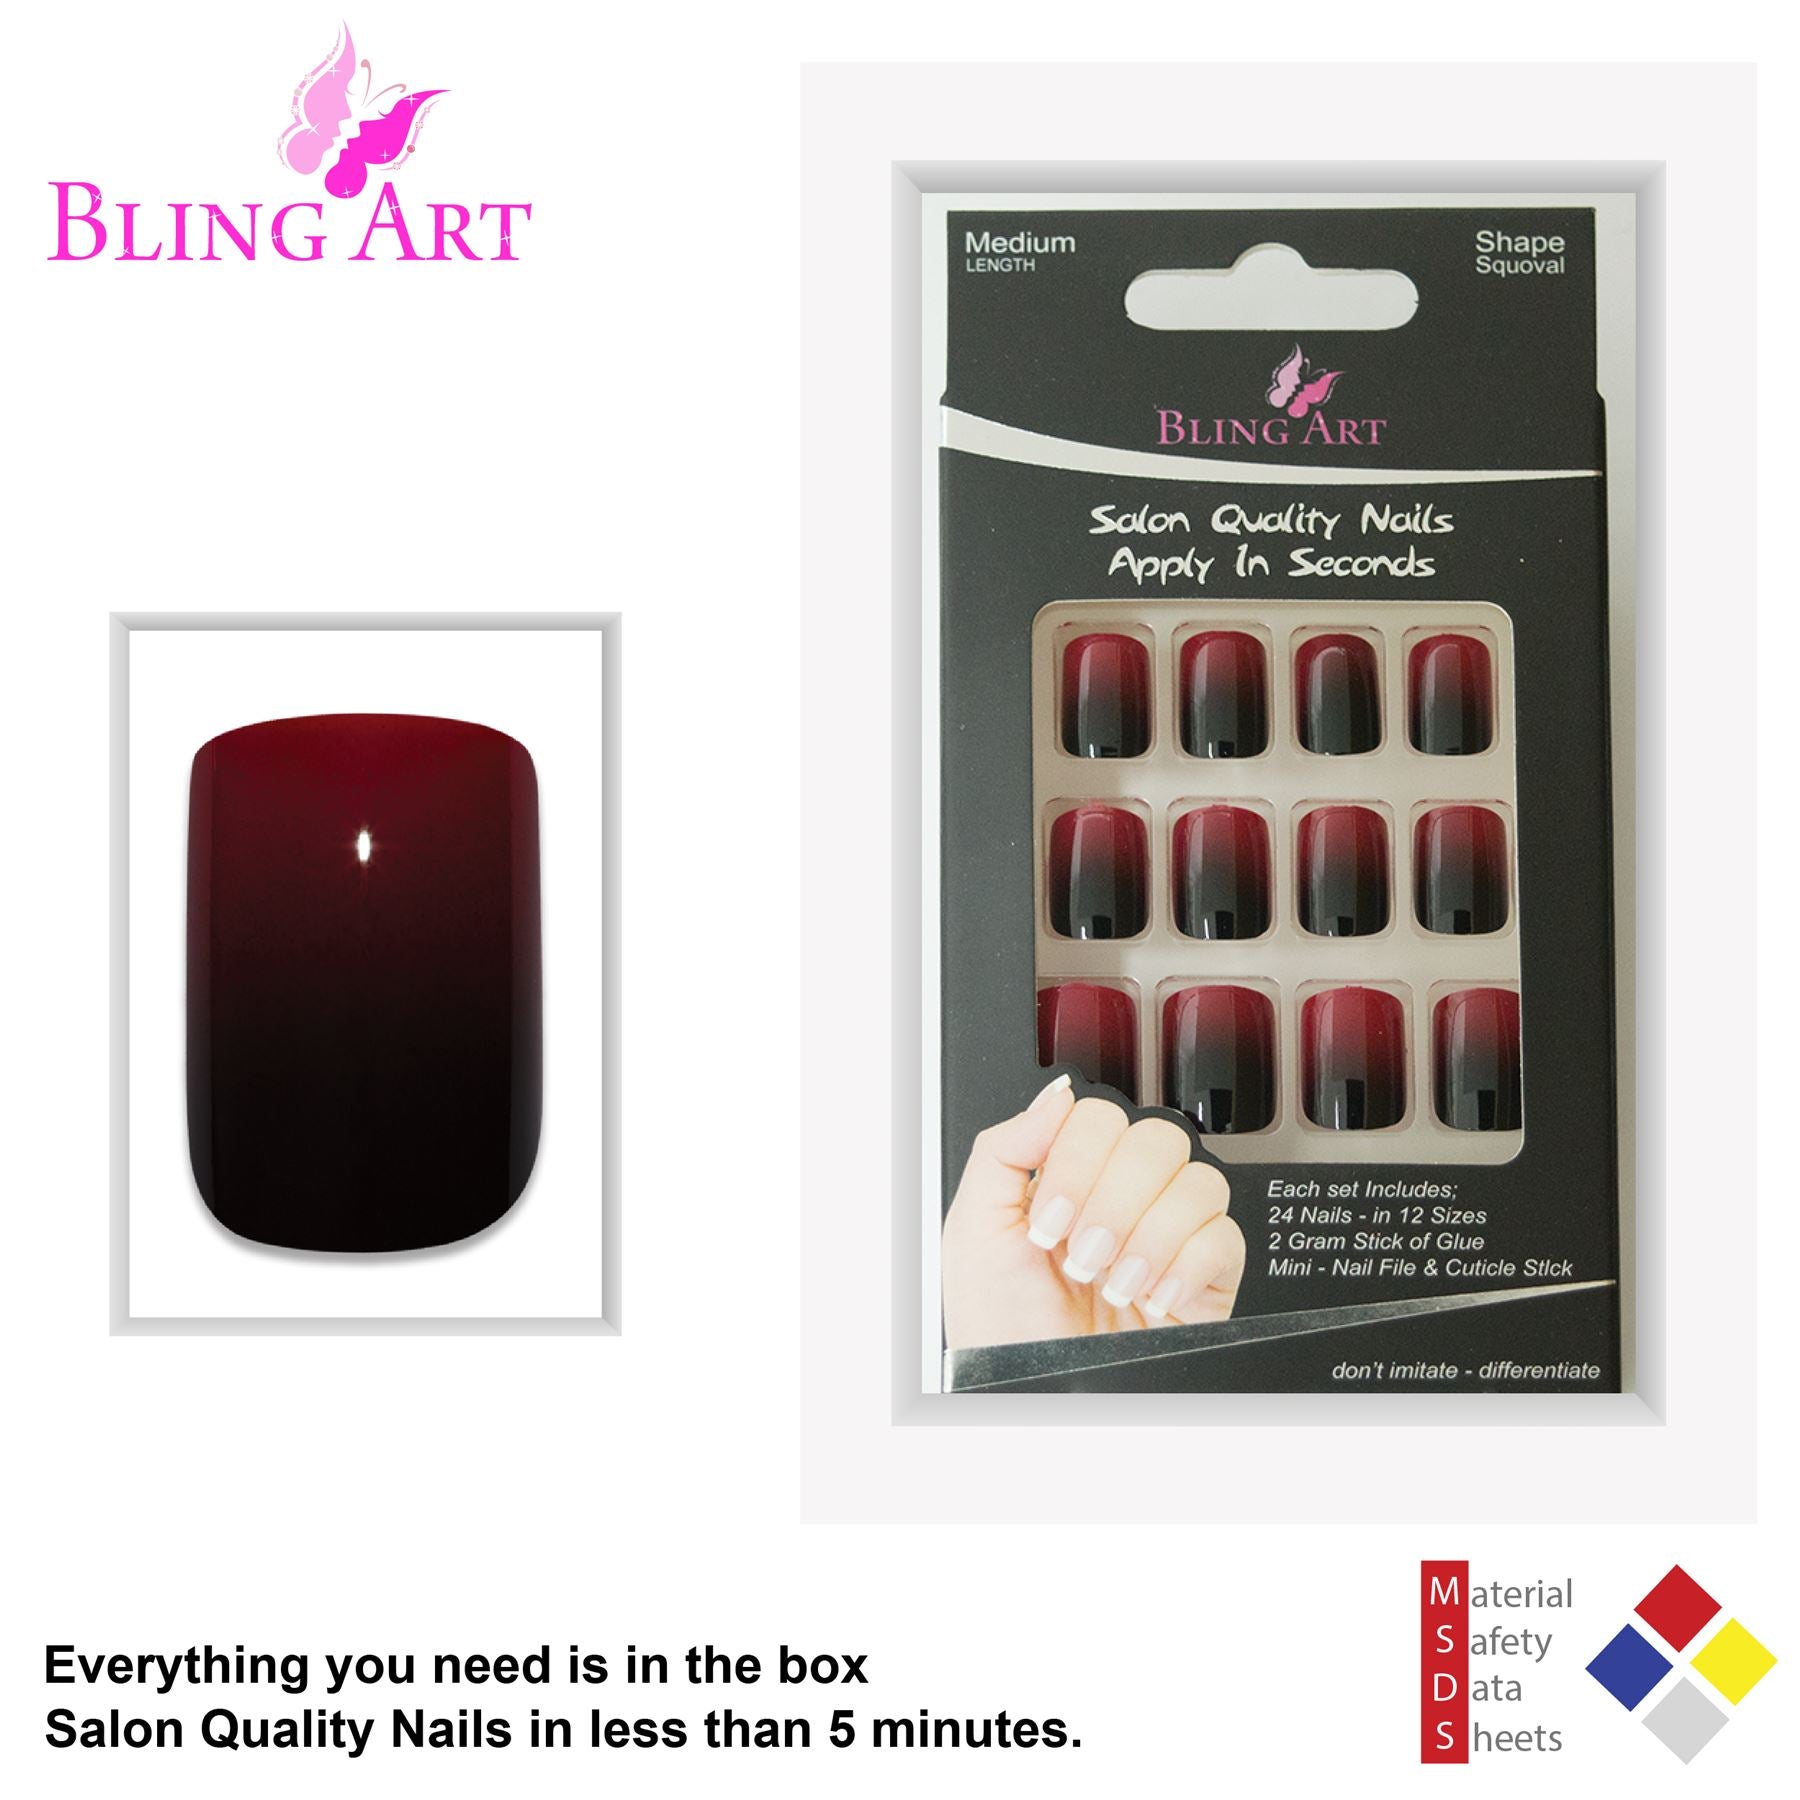 False Nails by Bling Art Red Black French Squoval 24 Fake Medium Acrylic Tips